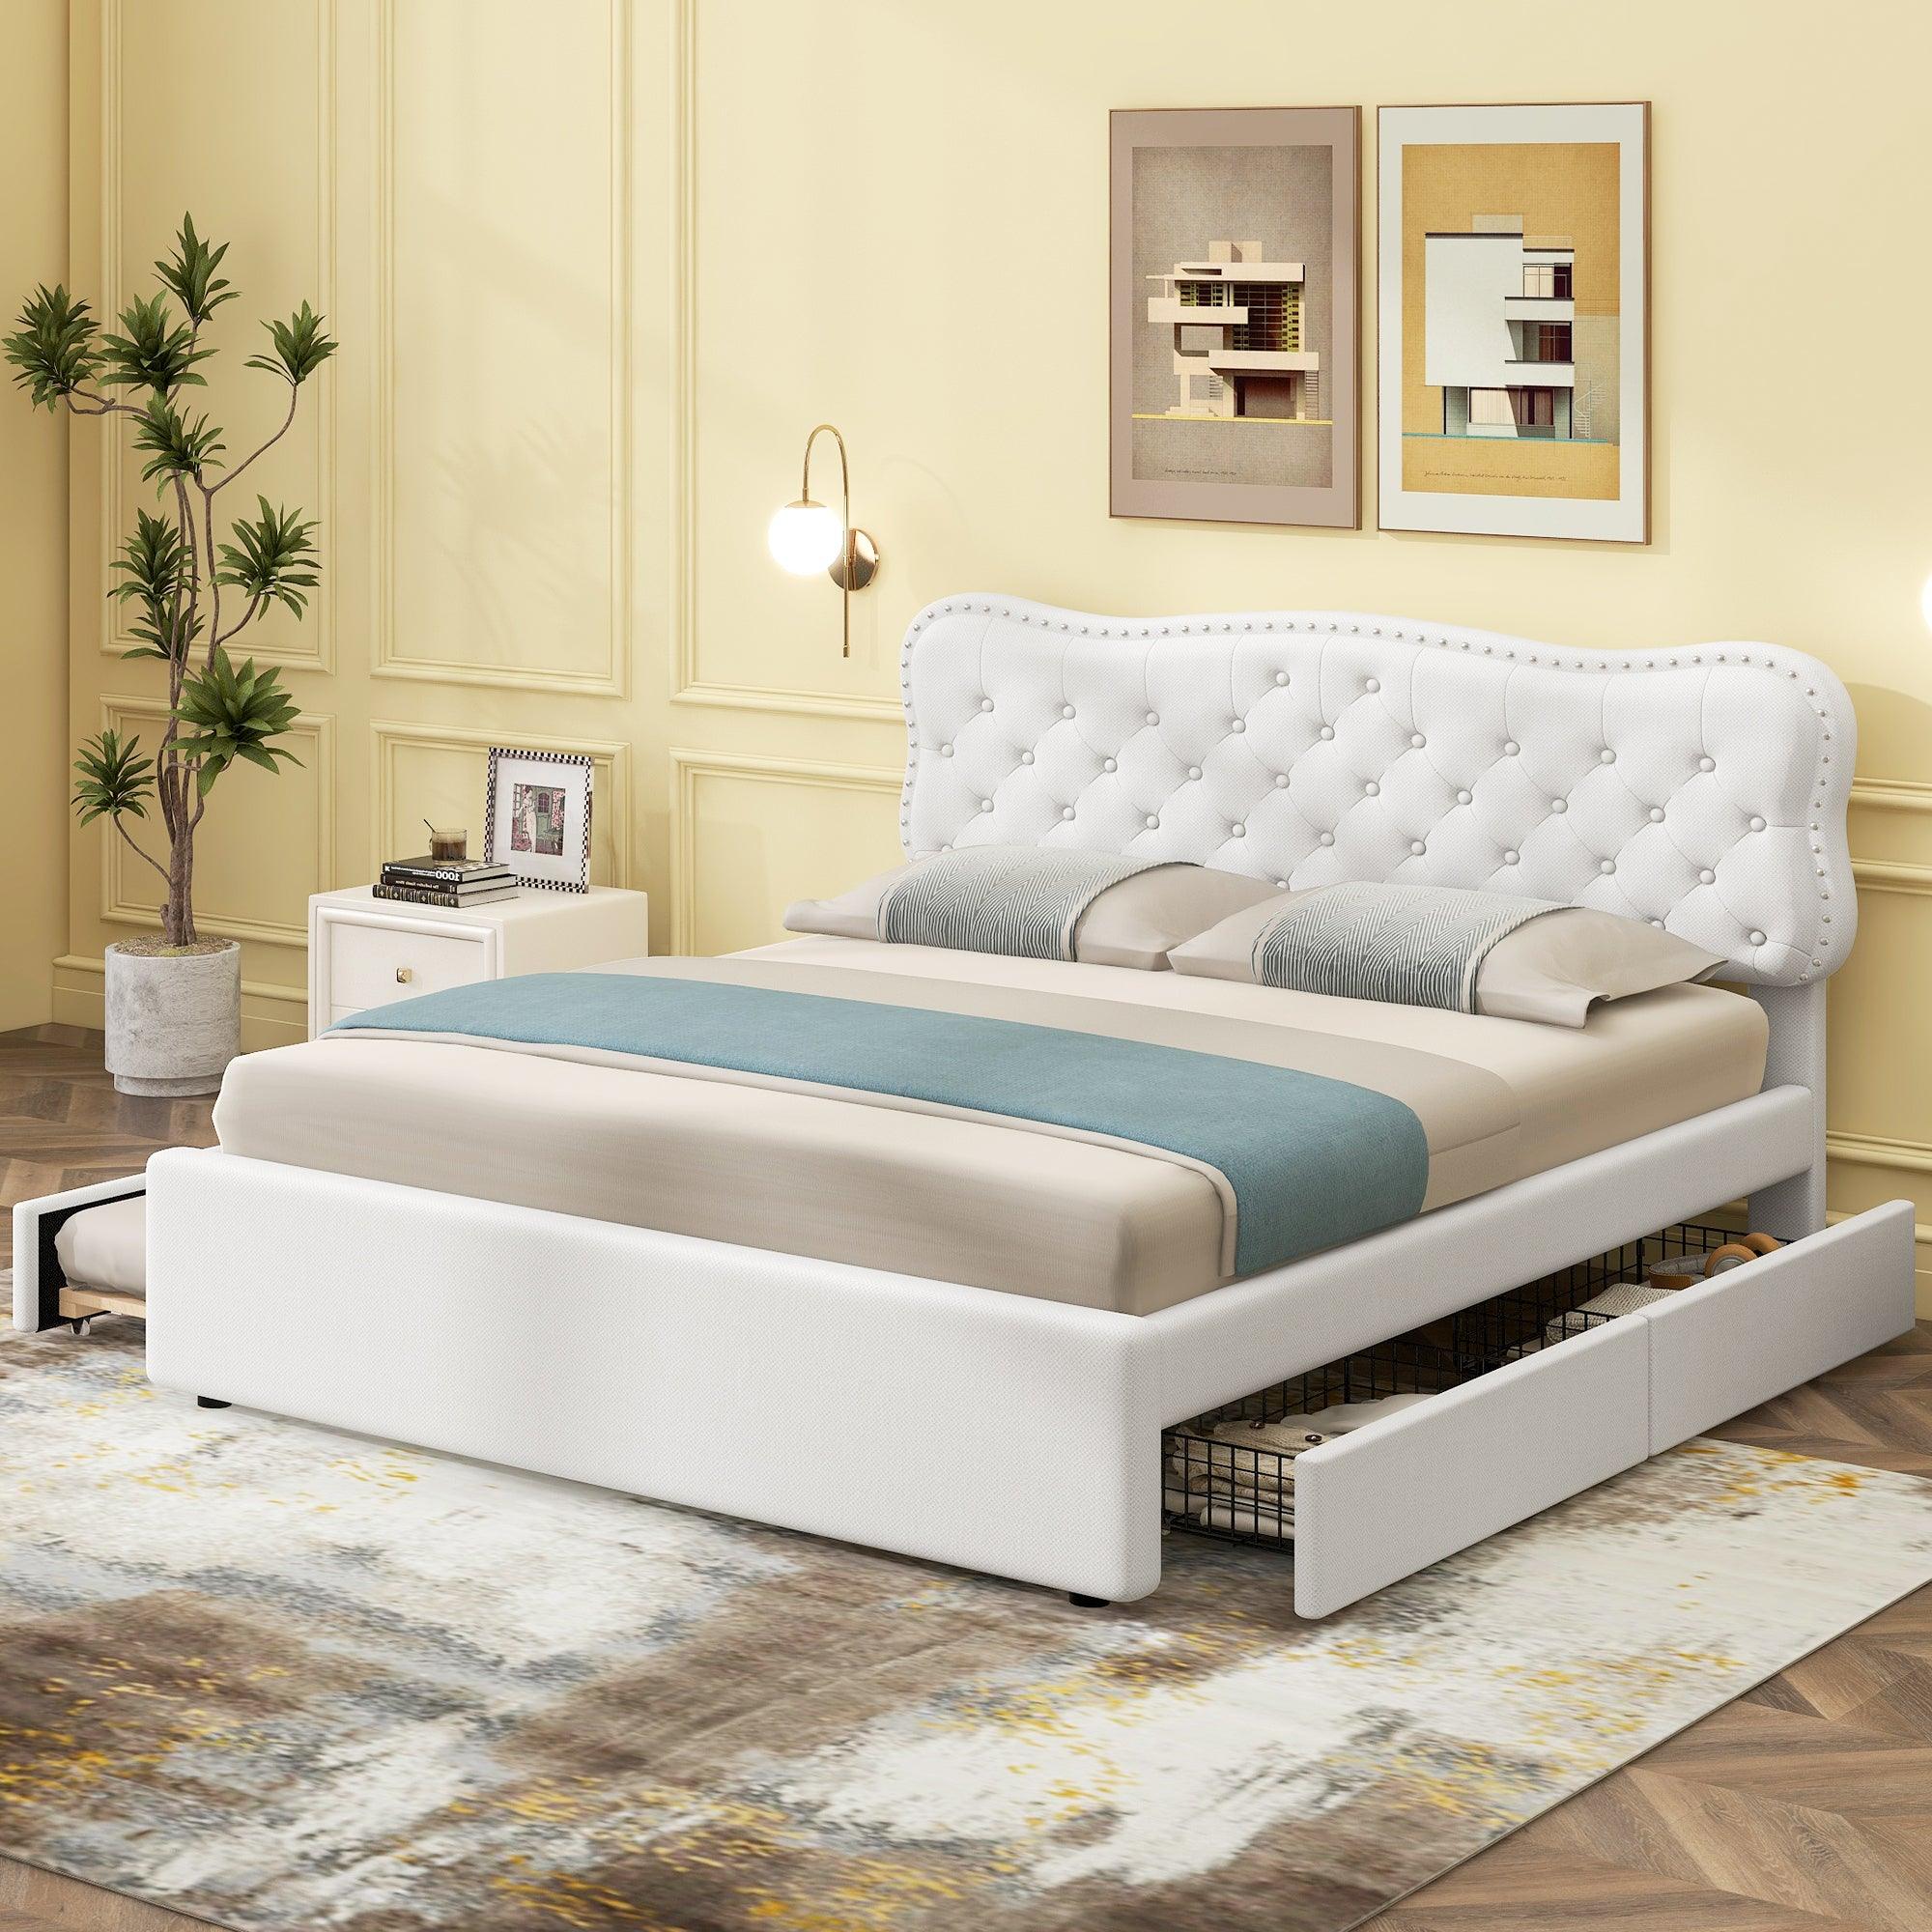 🆓🚛 Queen Size Upholstery Platform Bed With Storage Drawers & Trundle, White